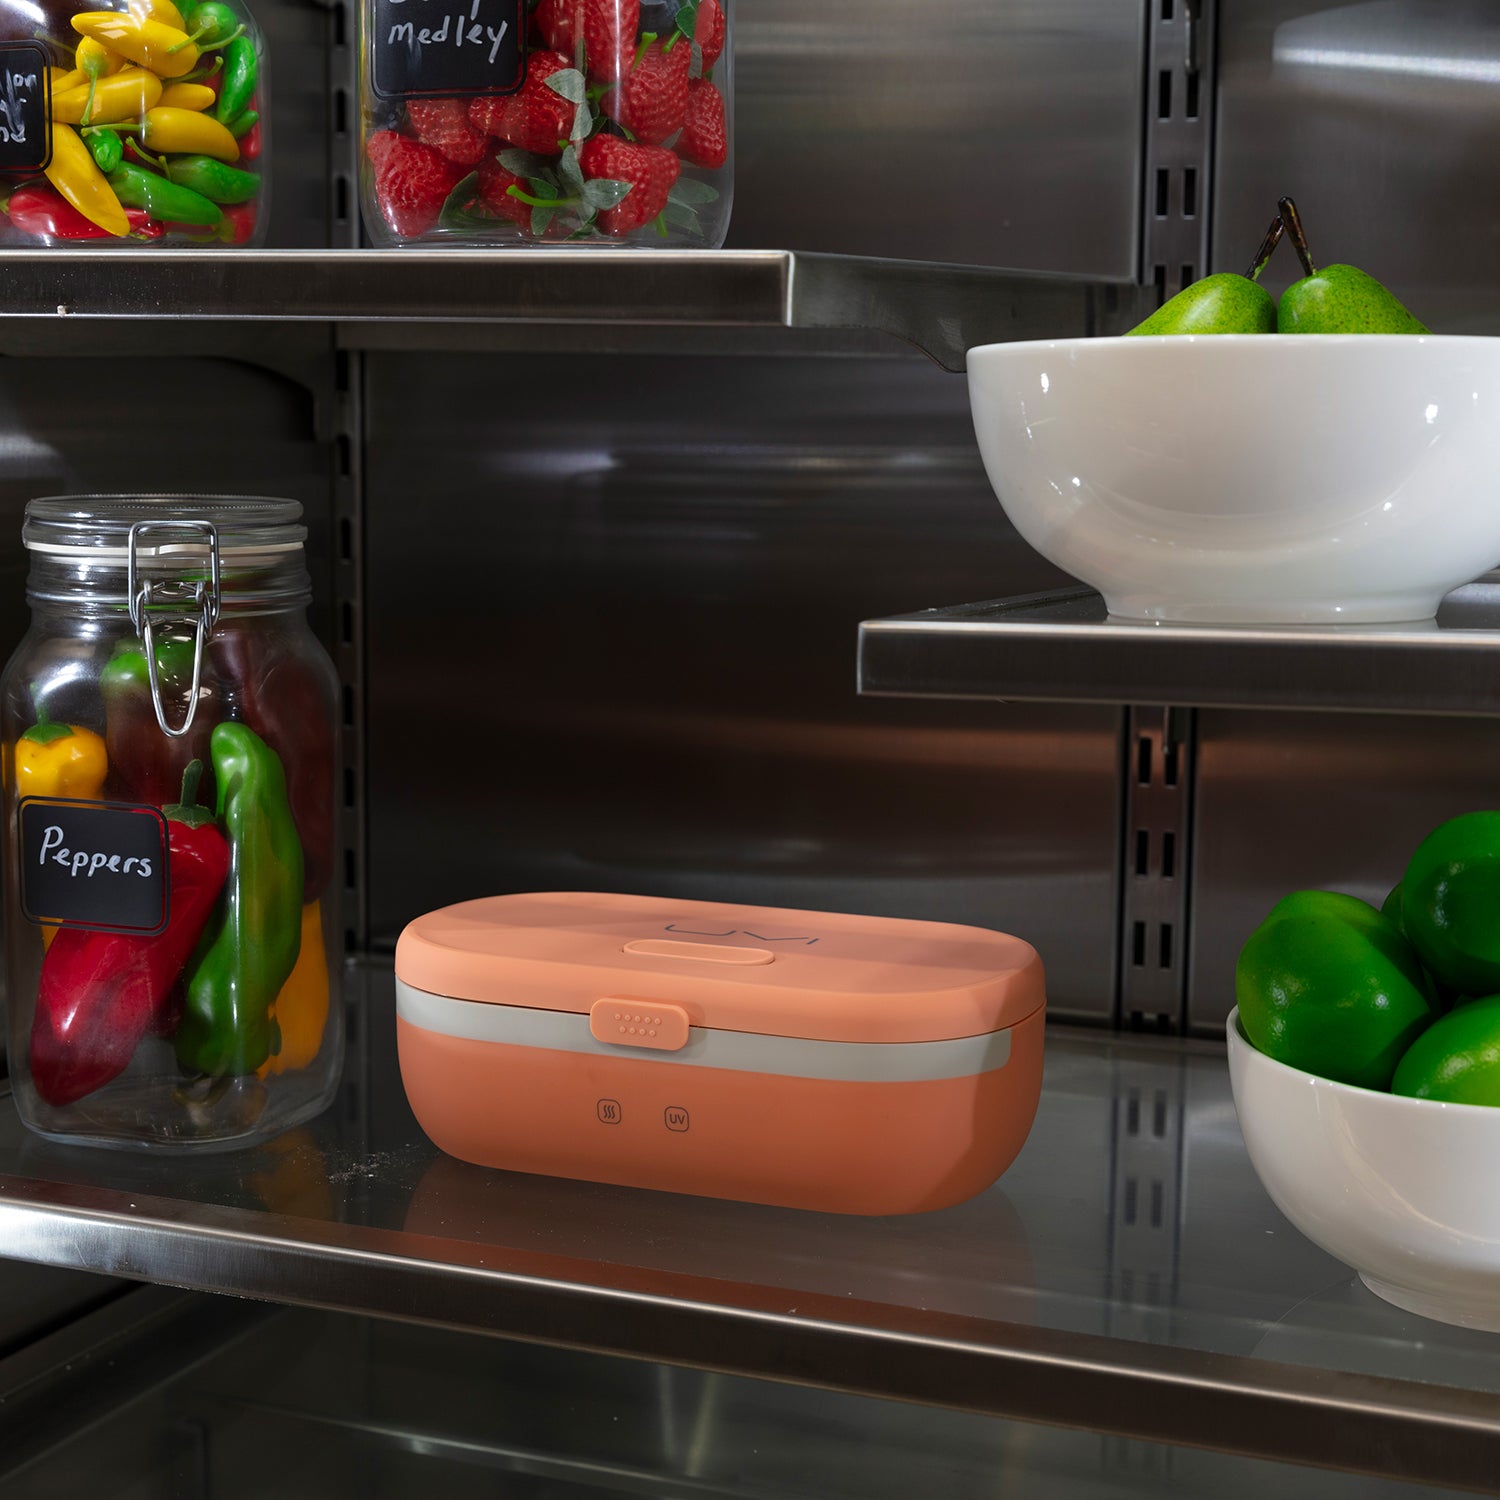 Electric Lunch Box, Heat Preservation And Heating Lunch Box, Self